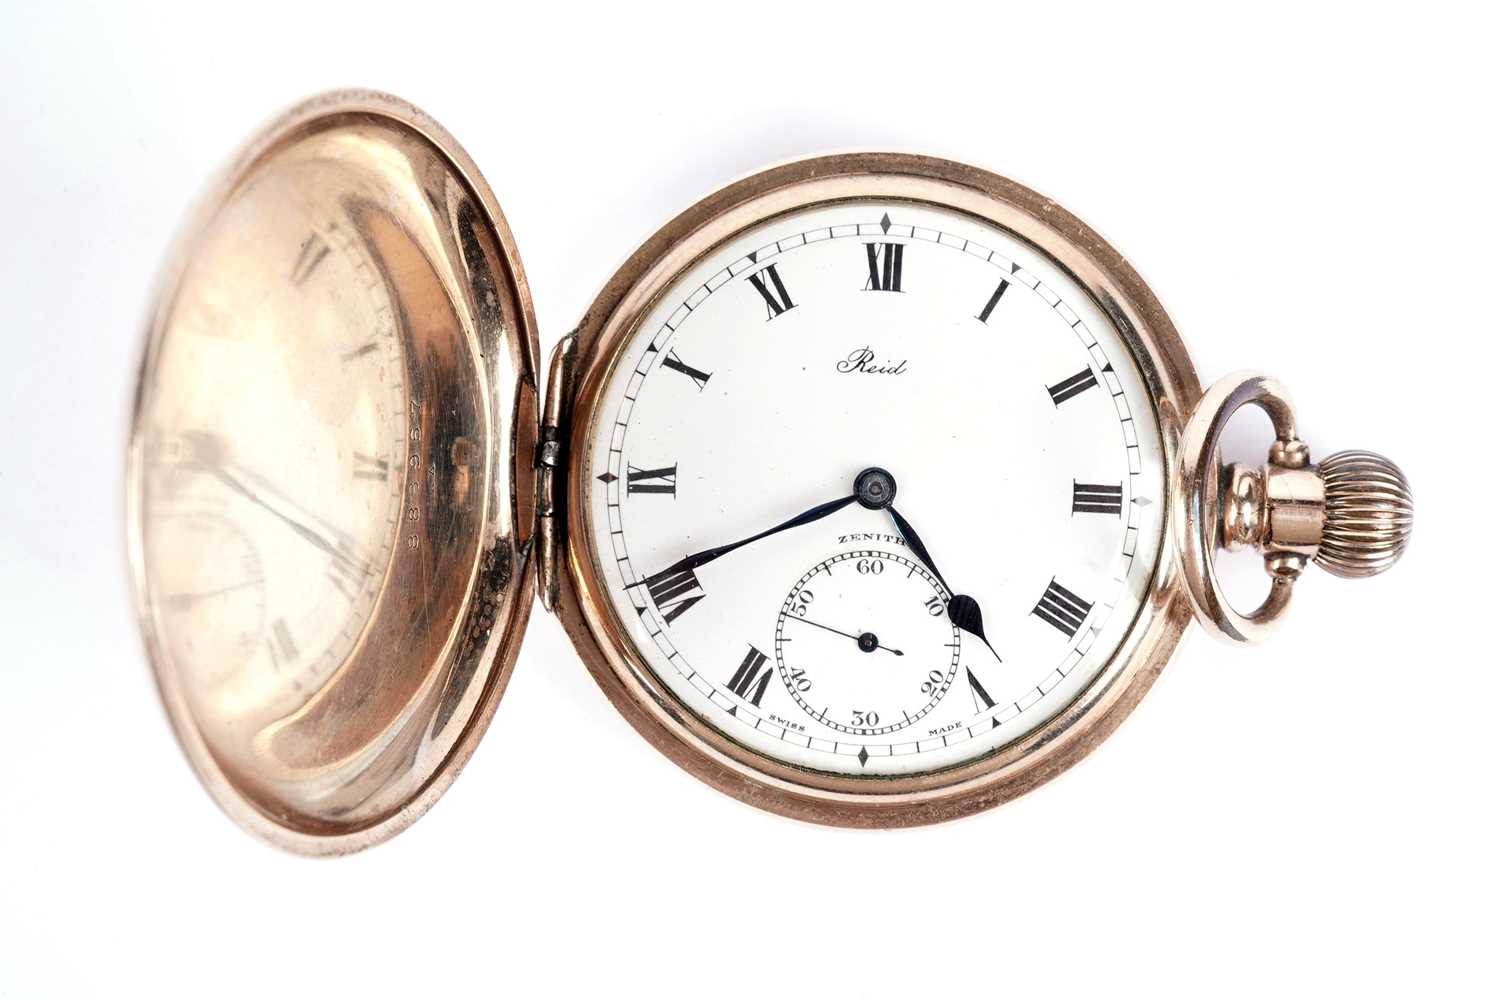 An antique gold-plated Zenith hunter pocket watch retailed by Reid & Sons - Image 2 of 6